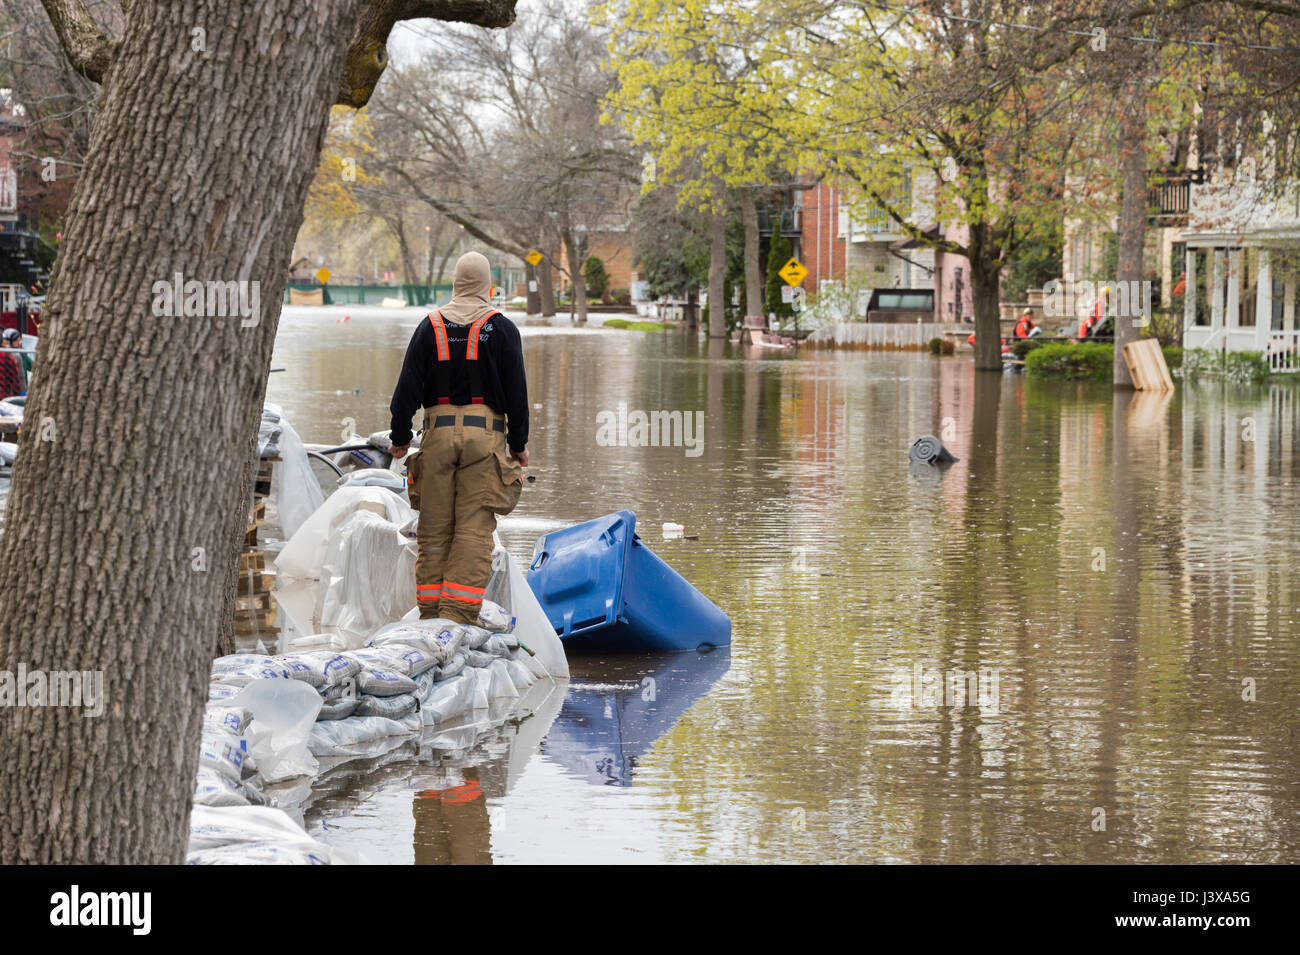 Montreal, Canada. 8th May, 2017. Rescue worker evaluates the situation as flooding hits Cousineau street Credit: Marc Bruxelle/Alamy Live News Stock Photo